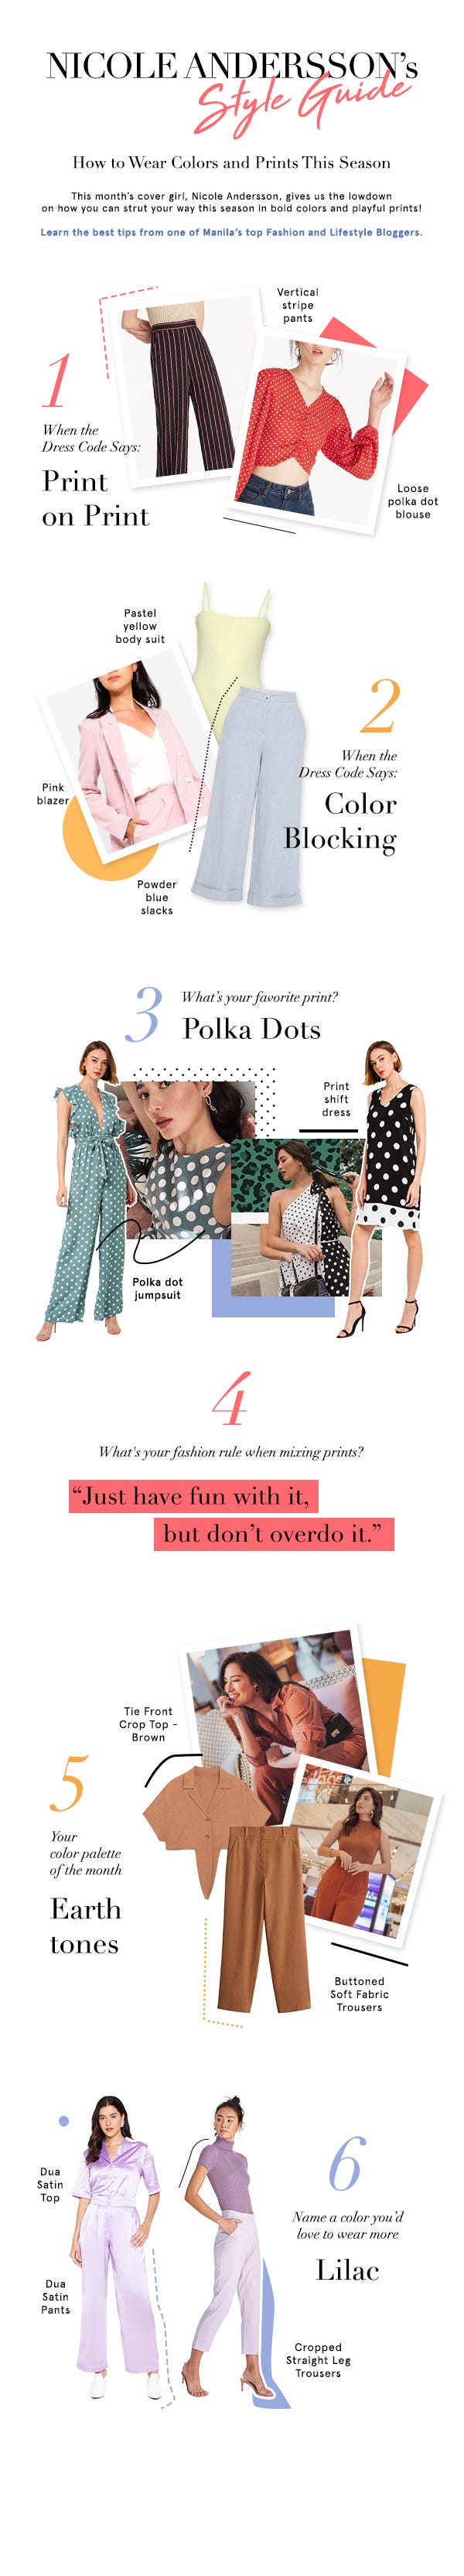 Nicole Andersson’s Style Guide on Wearing Colors and Prints | by Maan ...